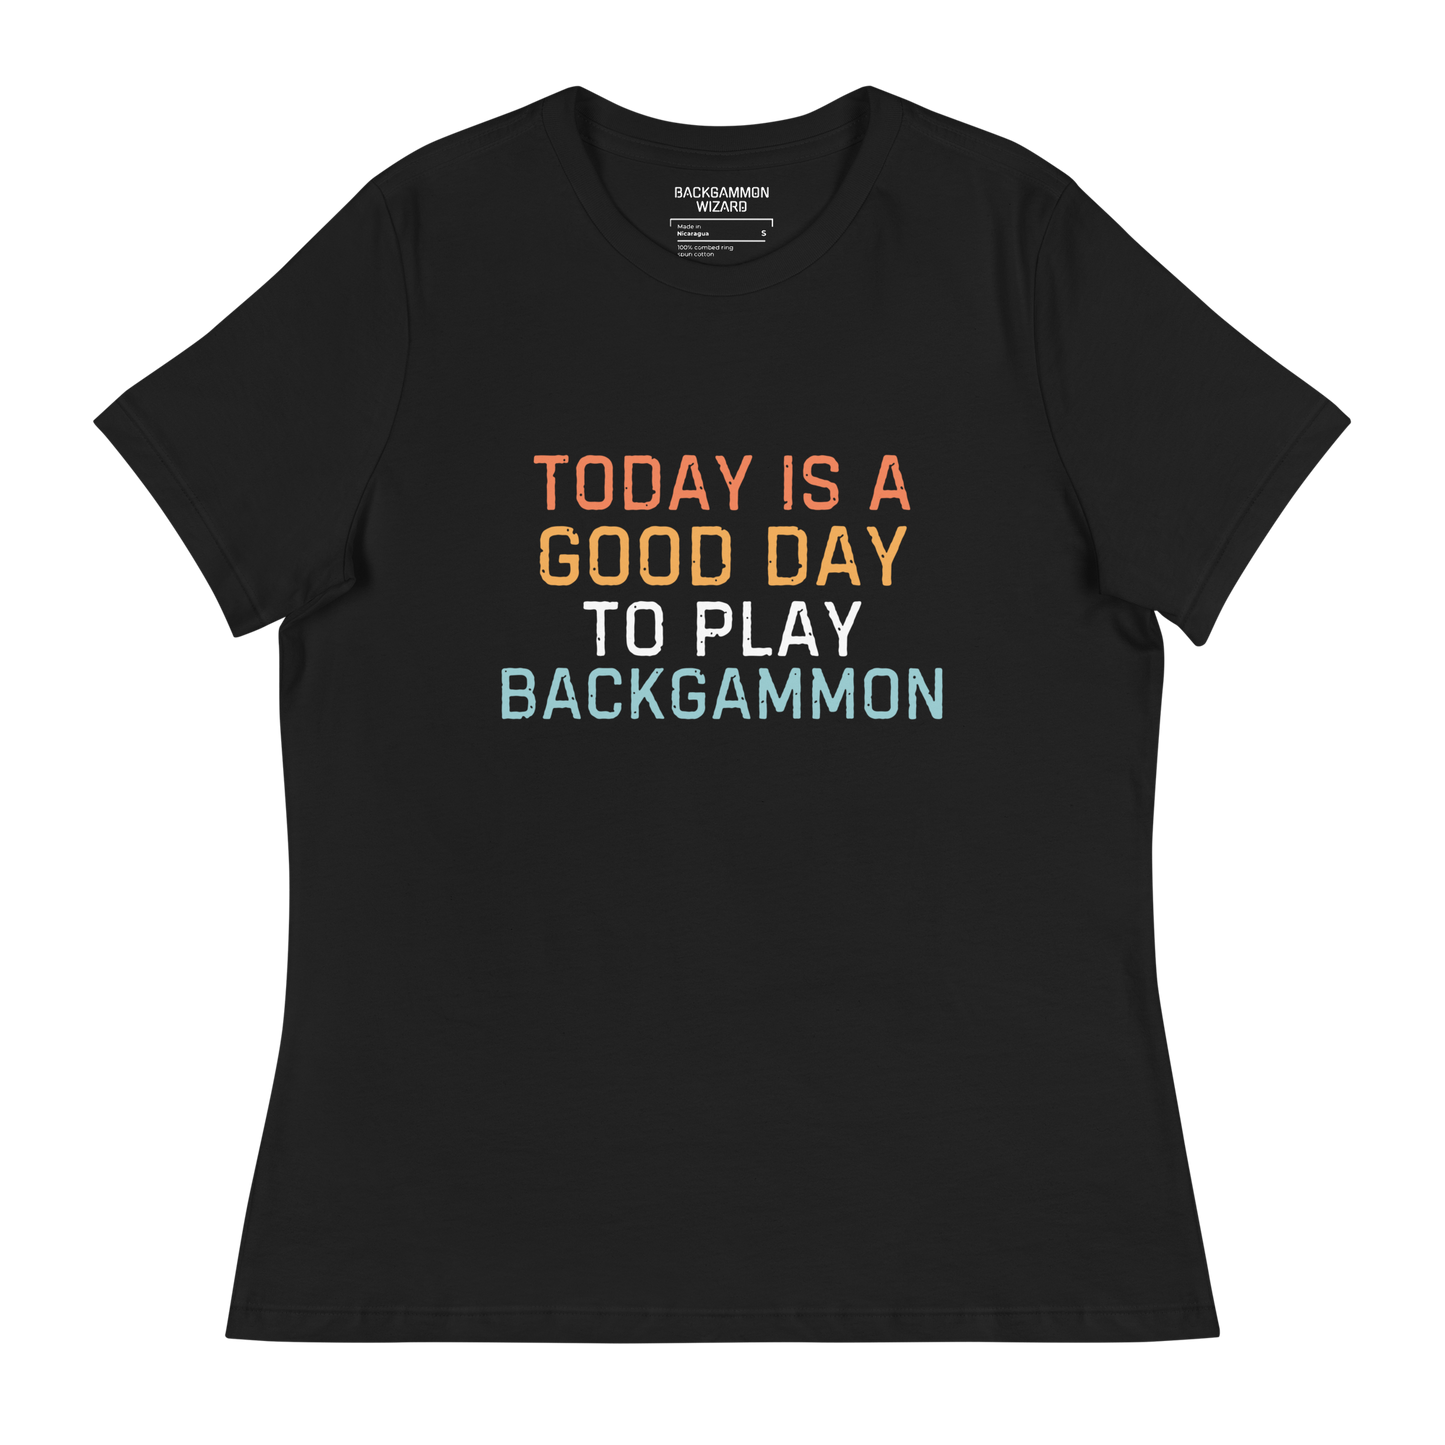 'TODAY IS A GOOD DAY TO PLAY BACKGAMMON' Women's Shirt